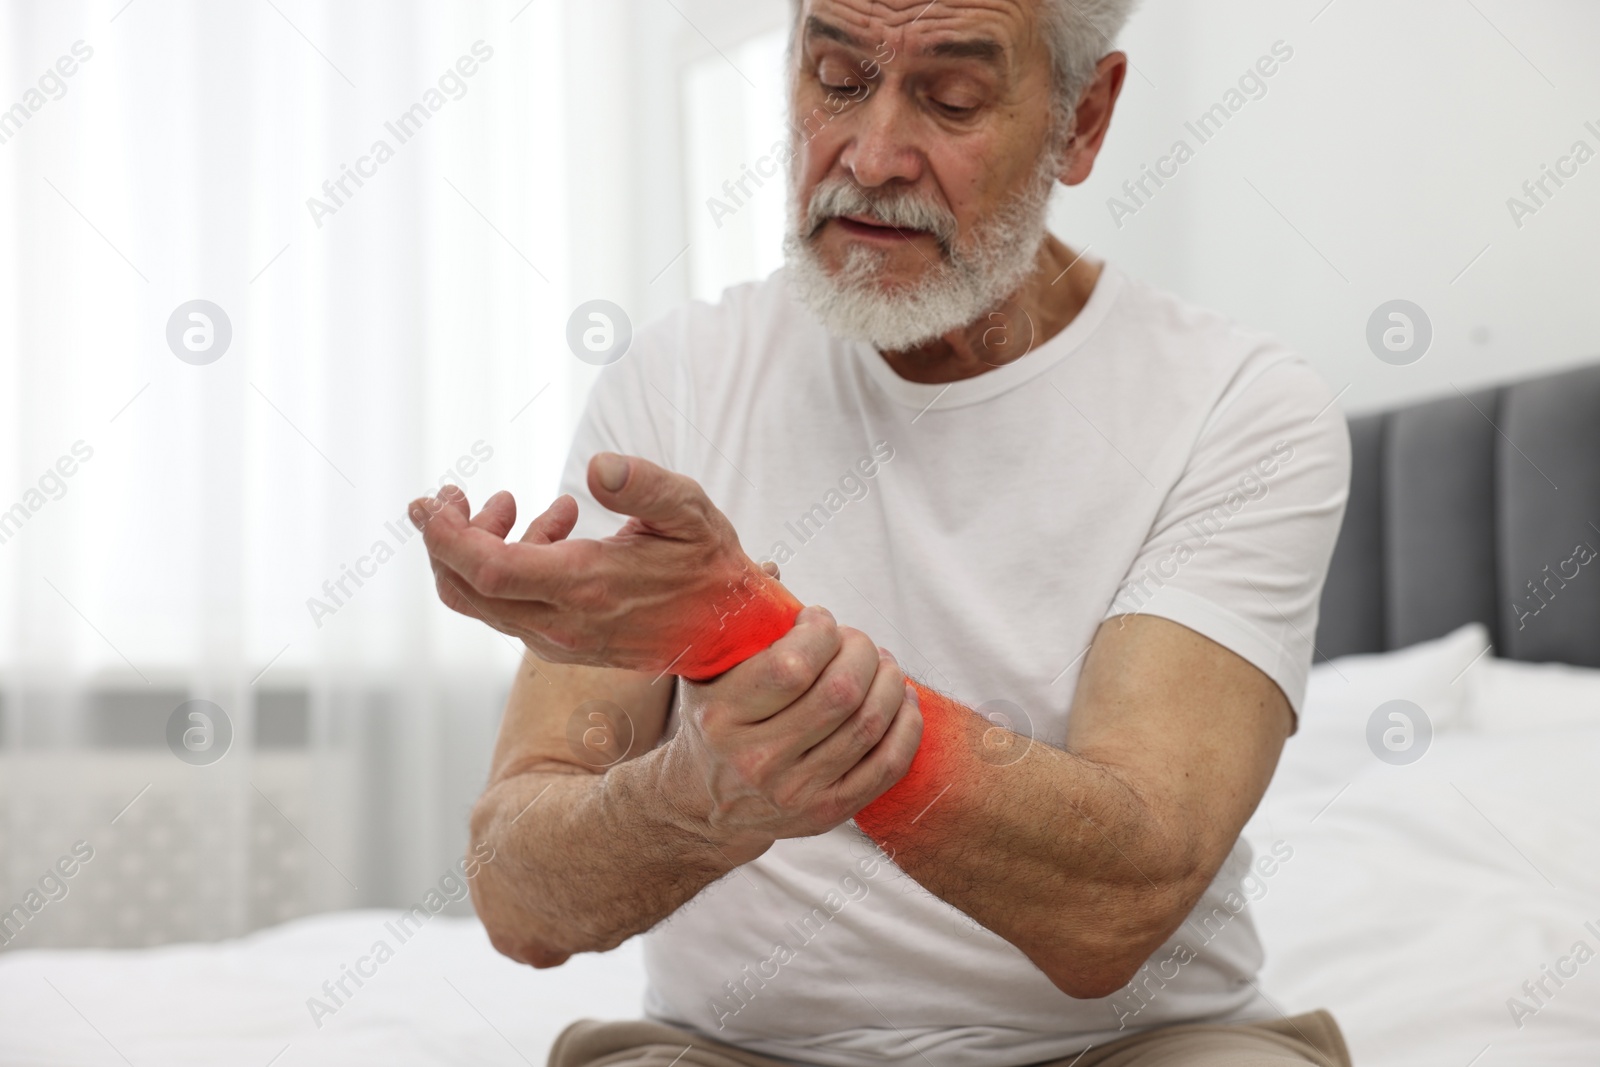 Image of Arthritis symptoms. Man suffering from pain in his wrist on bed indoors